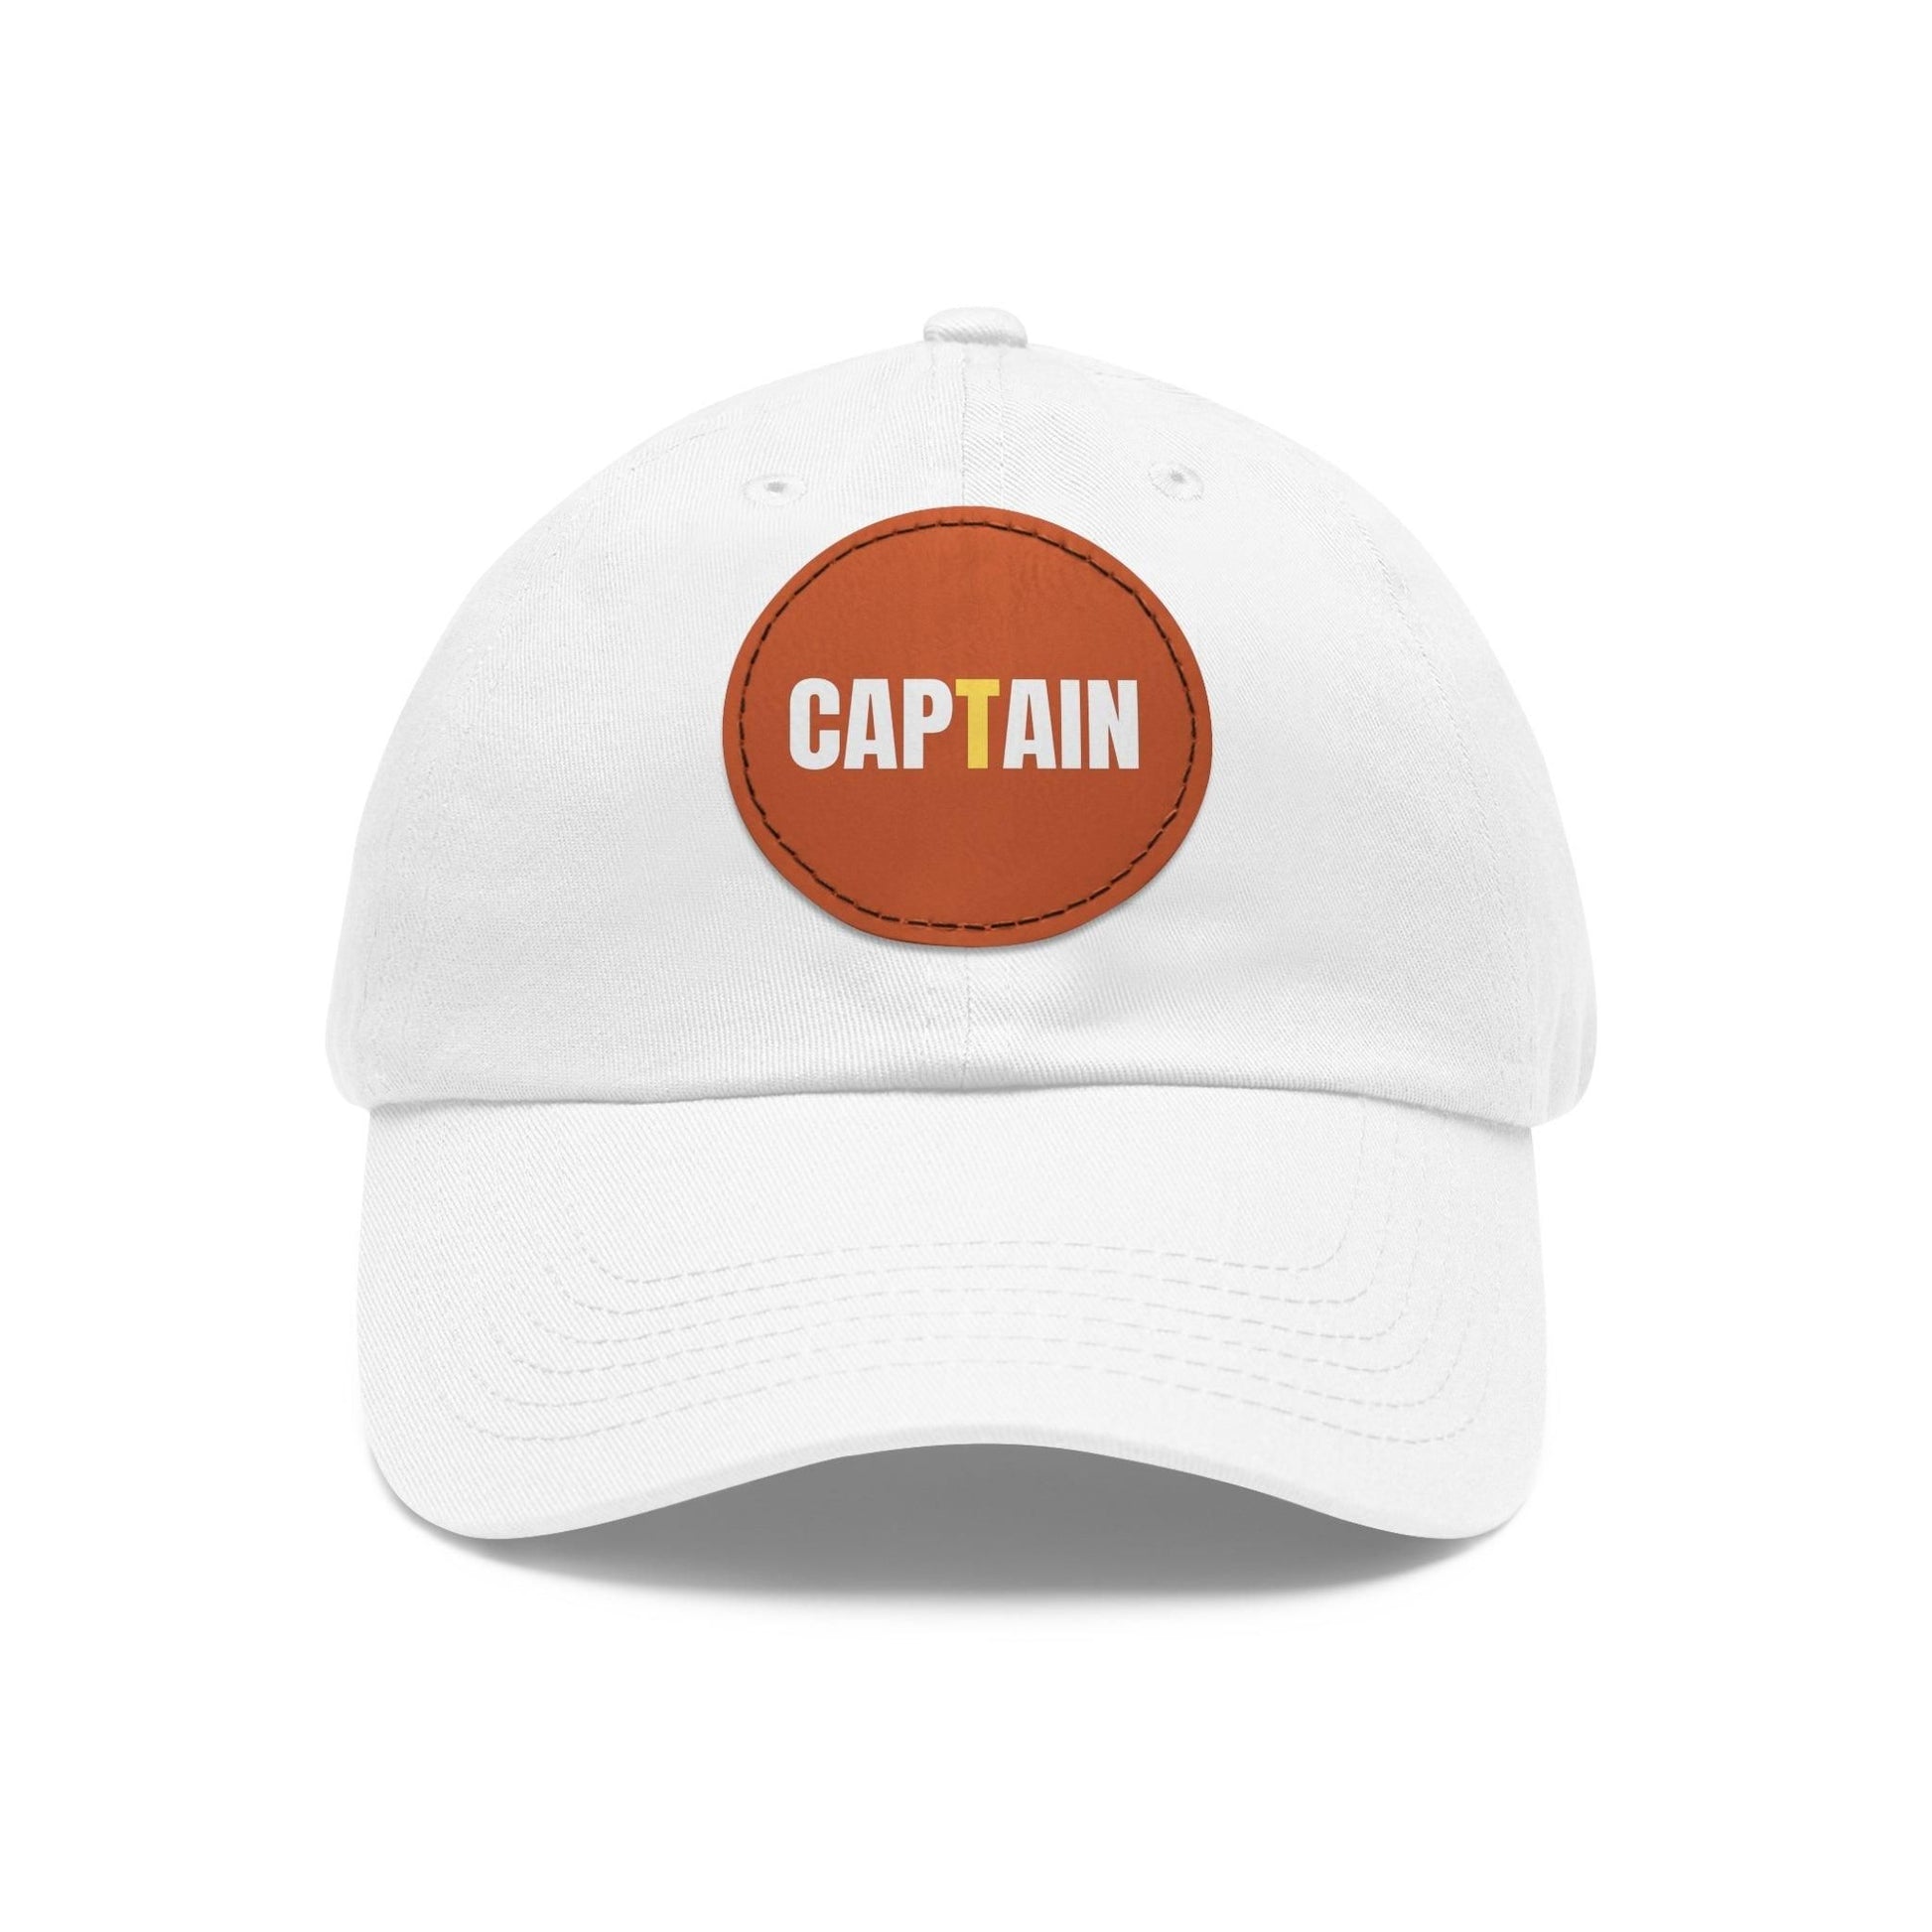 Captain Baseball Hat with Leather Patch Cap White / Light Brown patch Circle One size